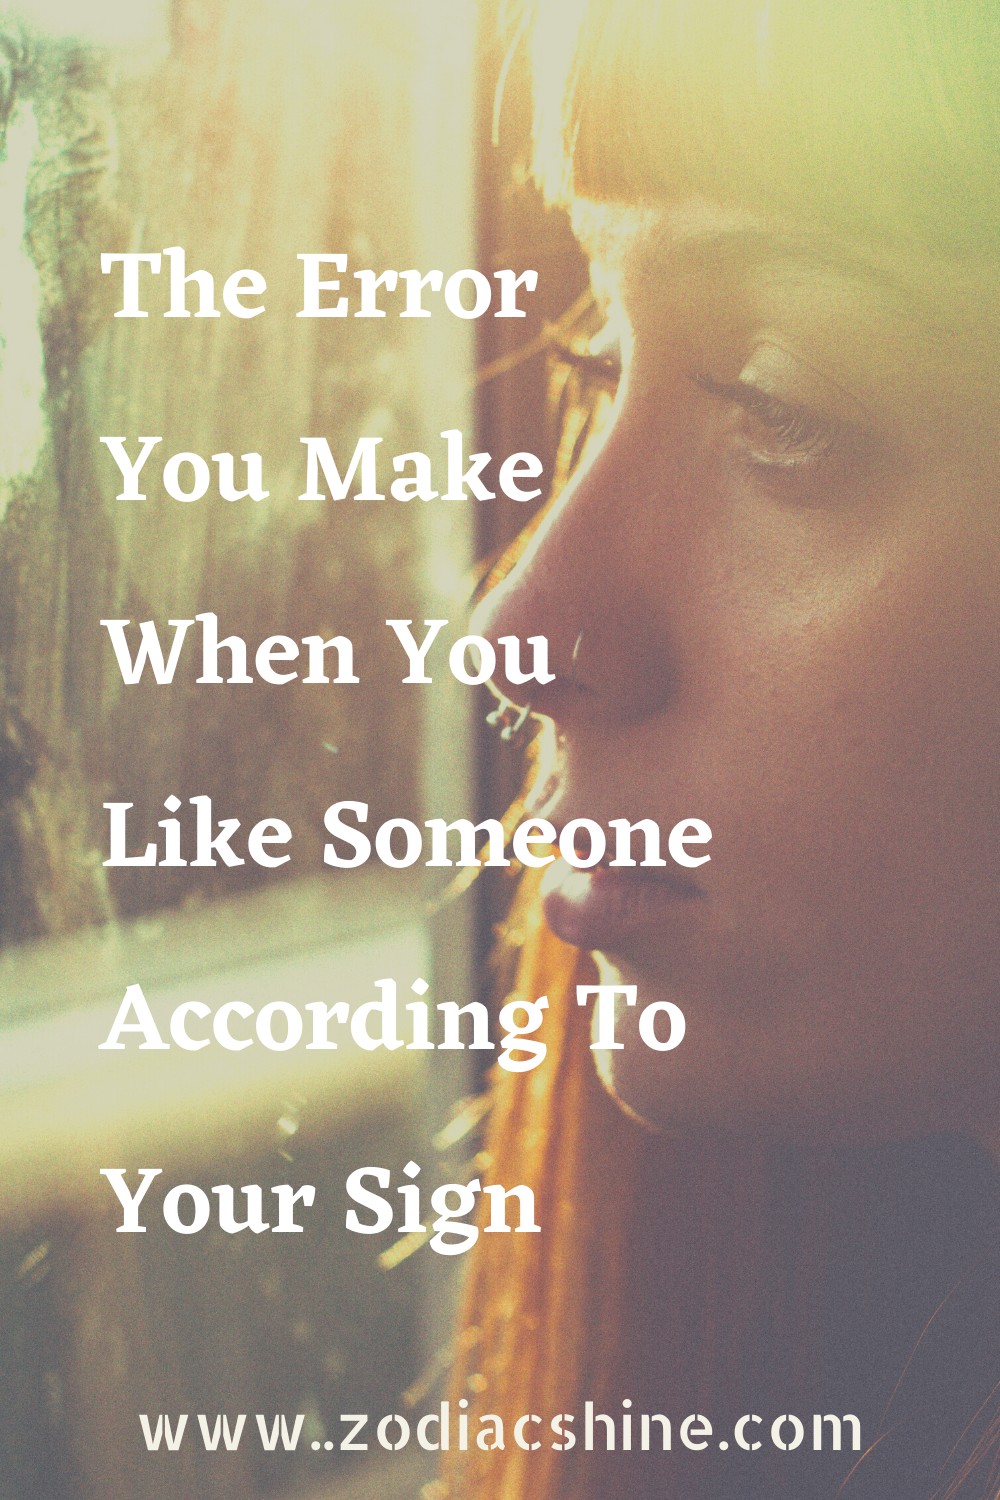 The Error You Make When You Like Someone According To Your Sign